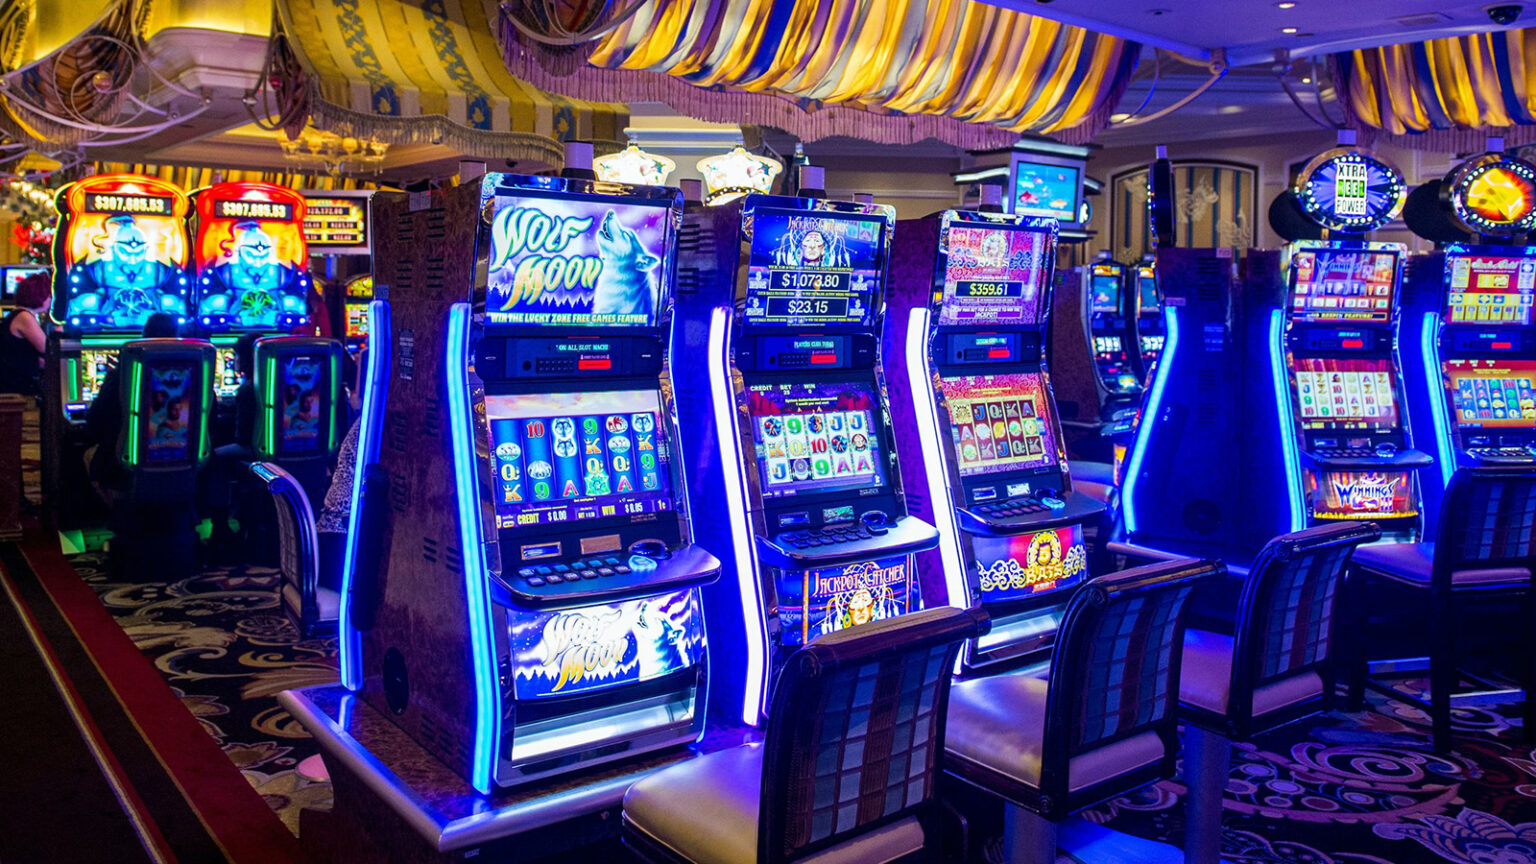 Slot games are on of the most popular games in the gambling industry. Check out some reasons why slots are so popular both online and in-person.